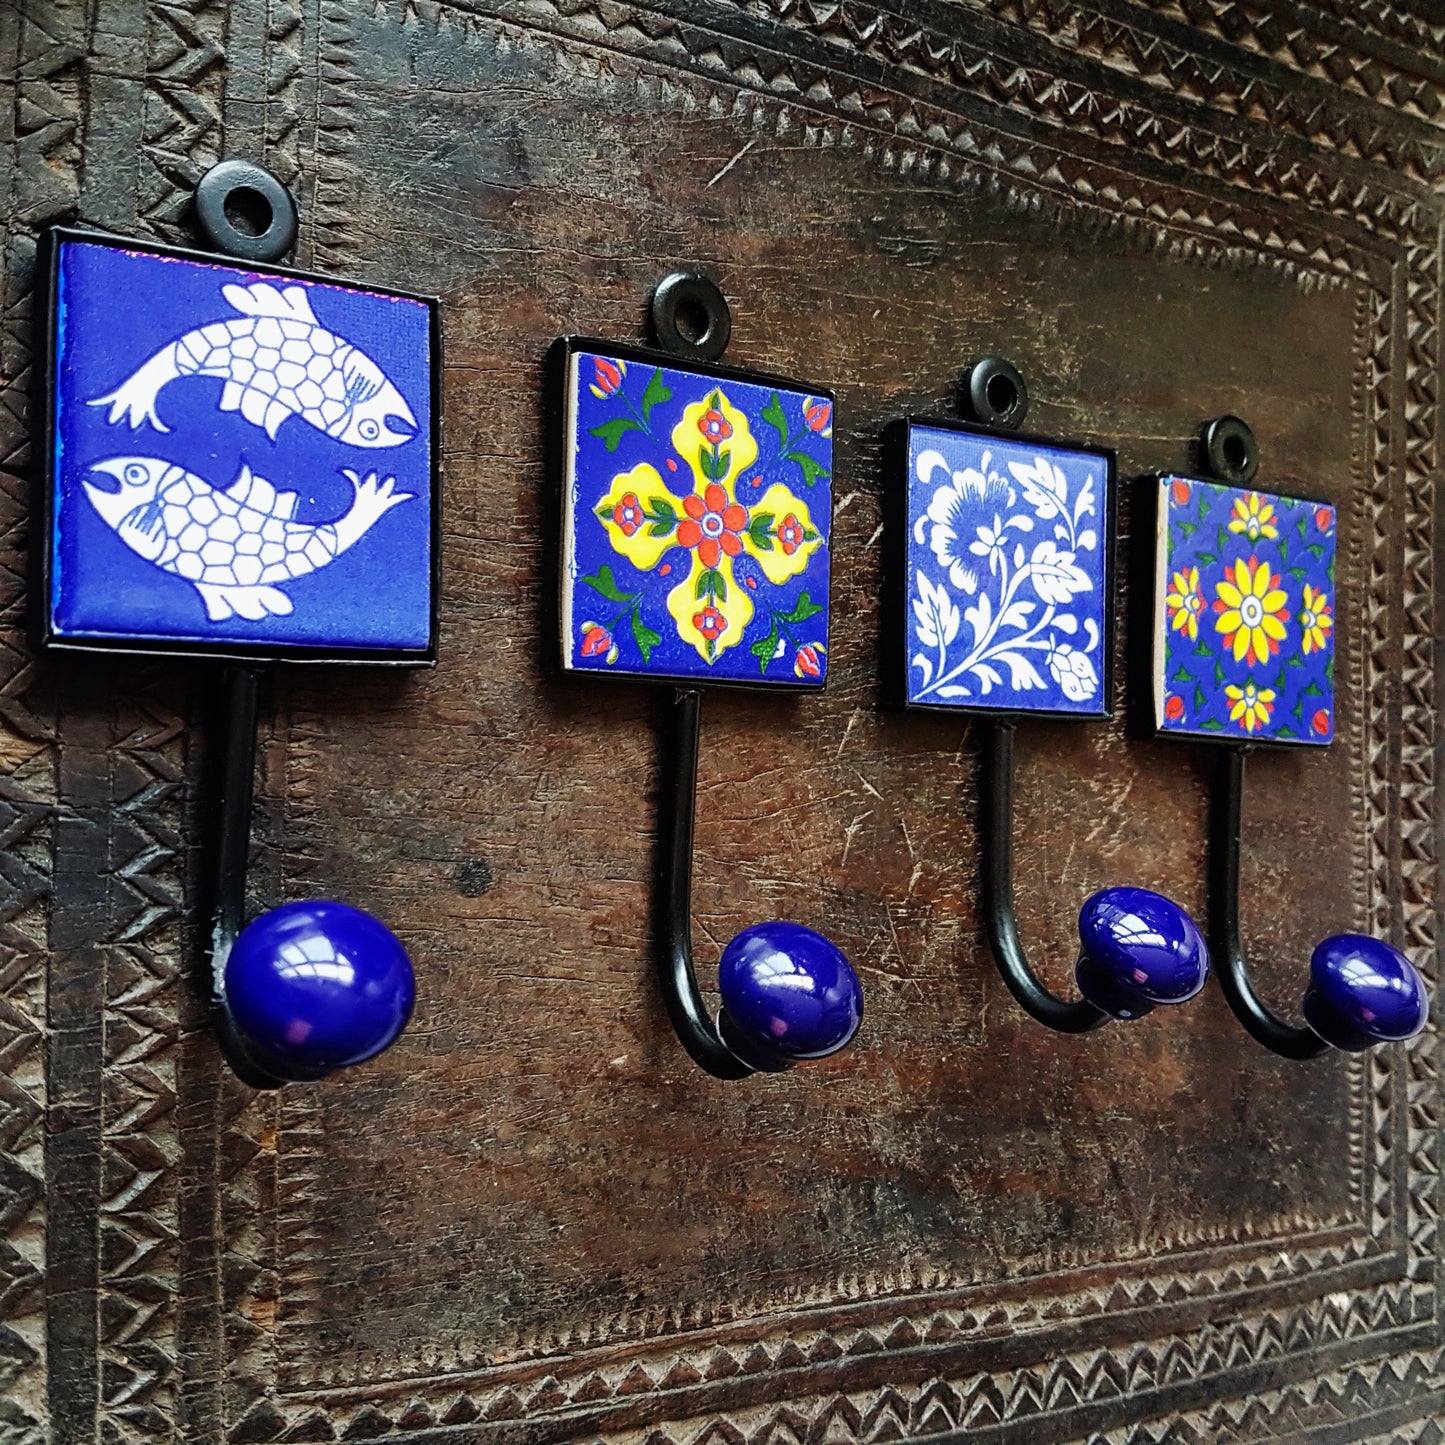 Set of 4 Avanti wall hooks for kitchen, bedroom & bath. Exclusive designs in rich blue color combos. Hand painted exclusive designs.